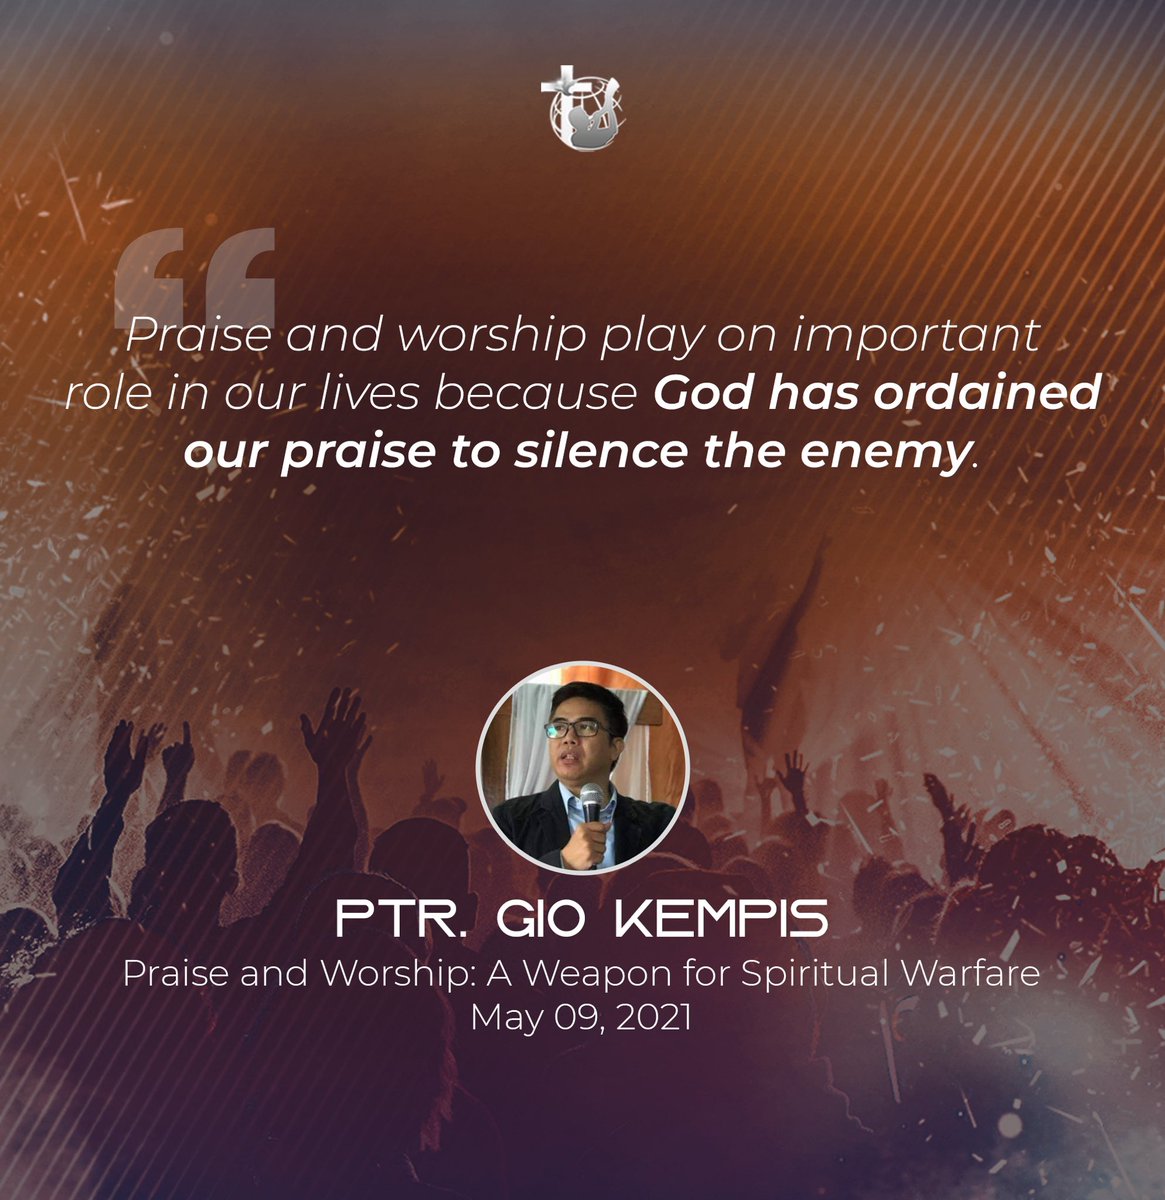 Did you know that our praise and worship is very powerful, and it is a weapon that can unlock doors, close doors, break chains, bring healing and deliverance, cause the enemy to back out and take his hands off our loved ones and our Church?

#MadeToWorship
#WorshipAsOne